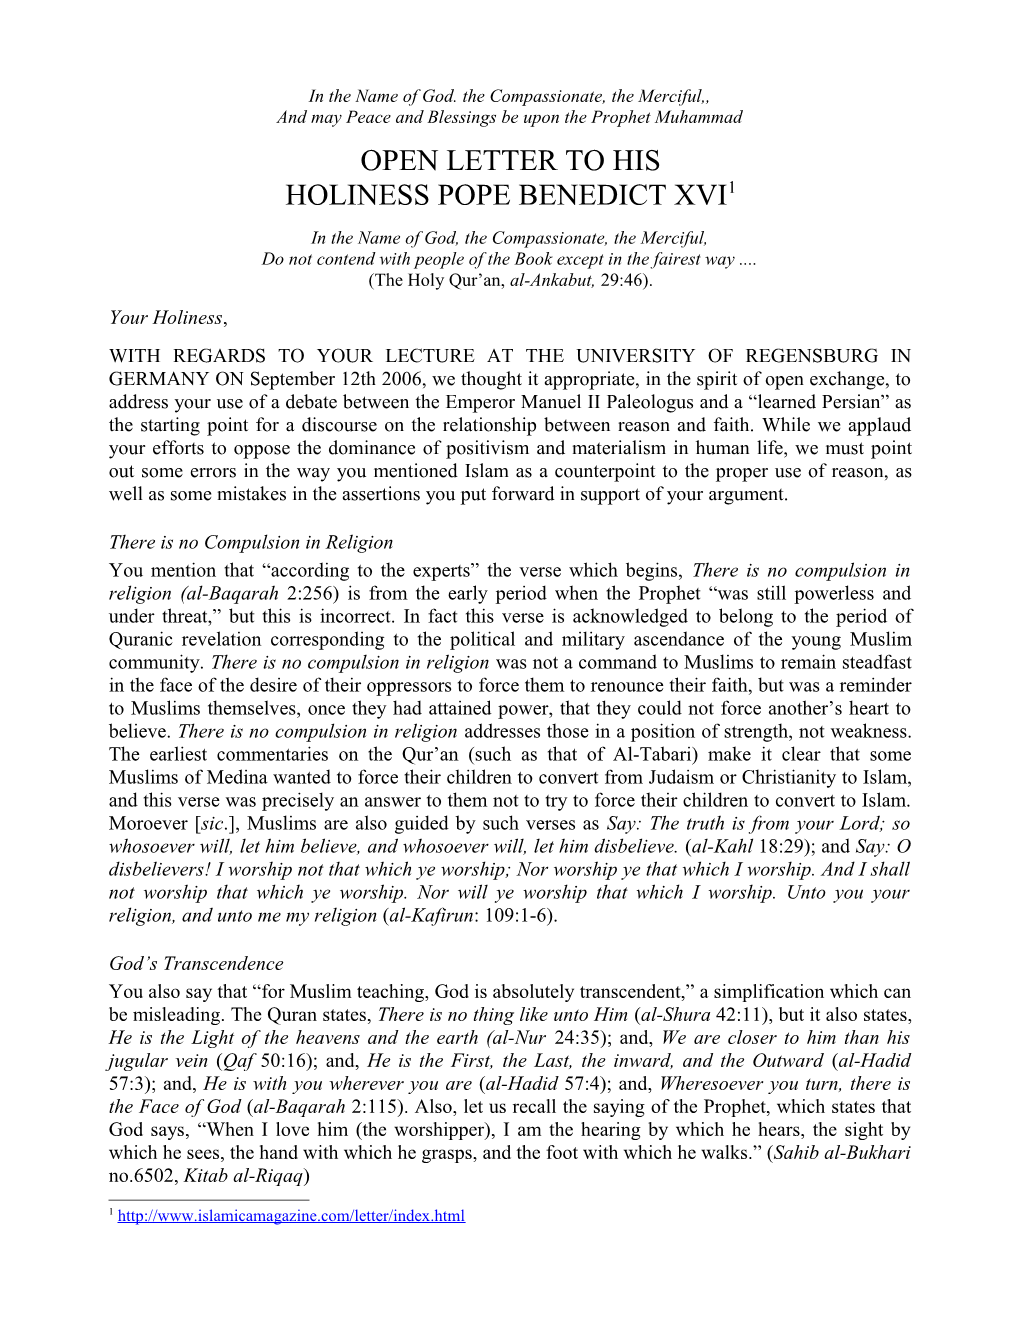 Open Letter to His Holiness Pope Benedict XVI